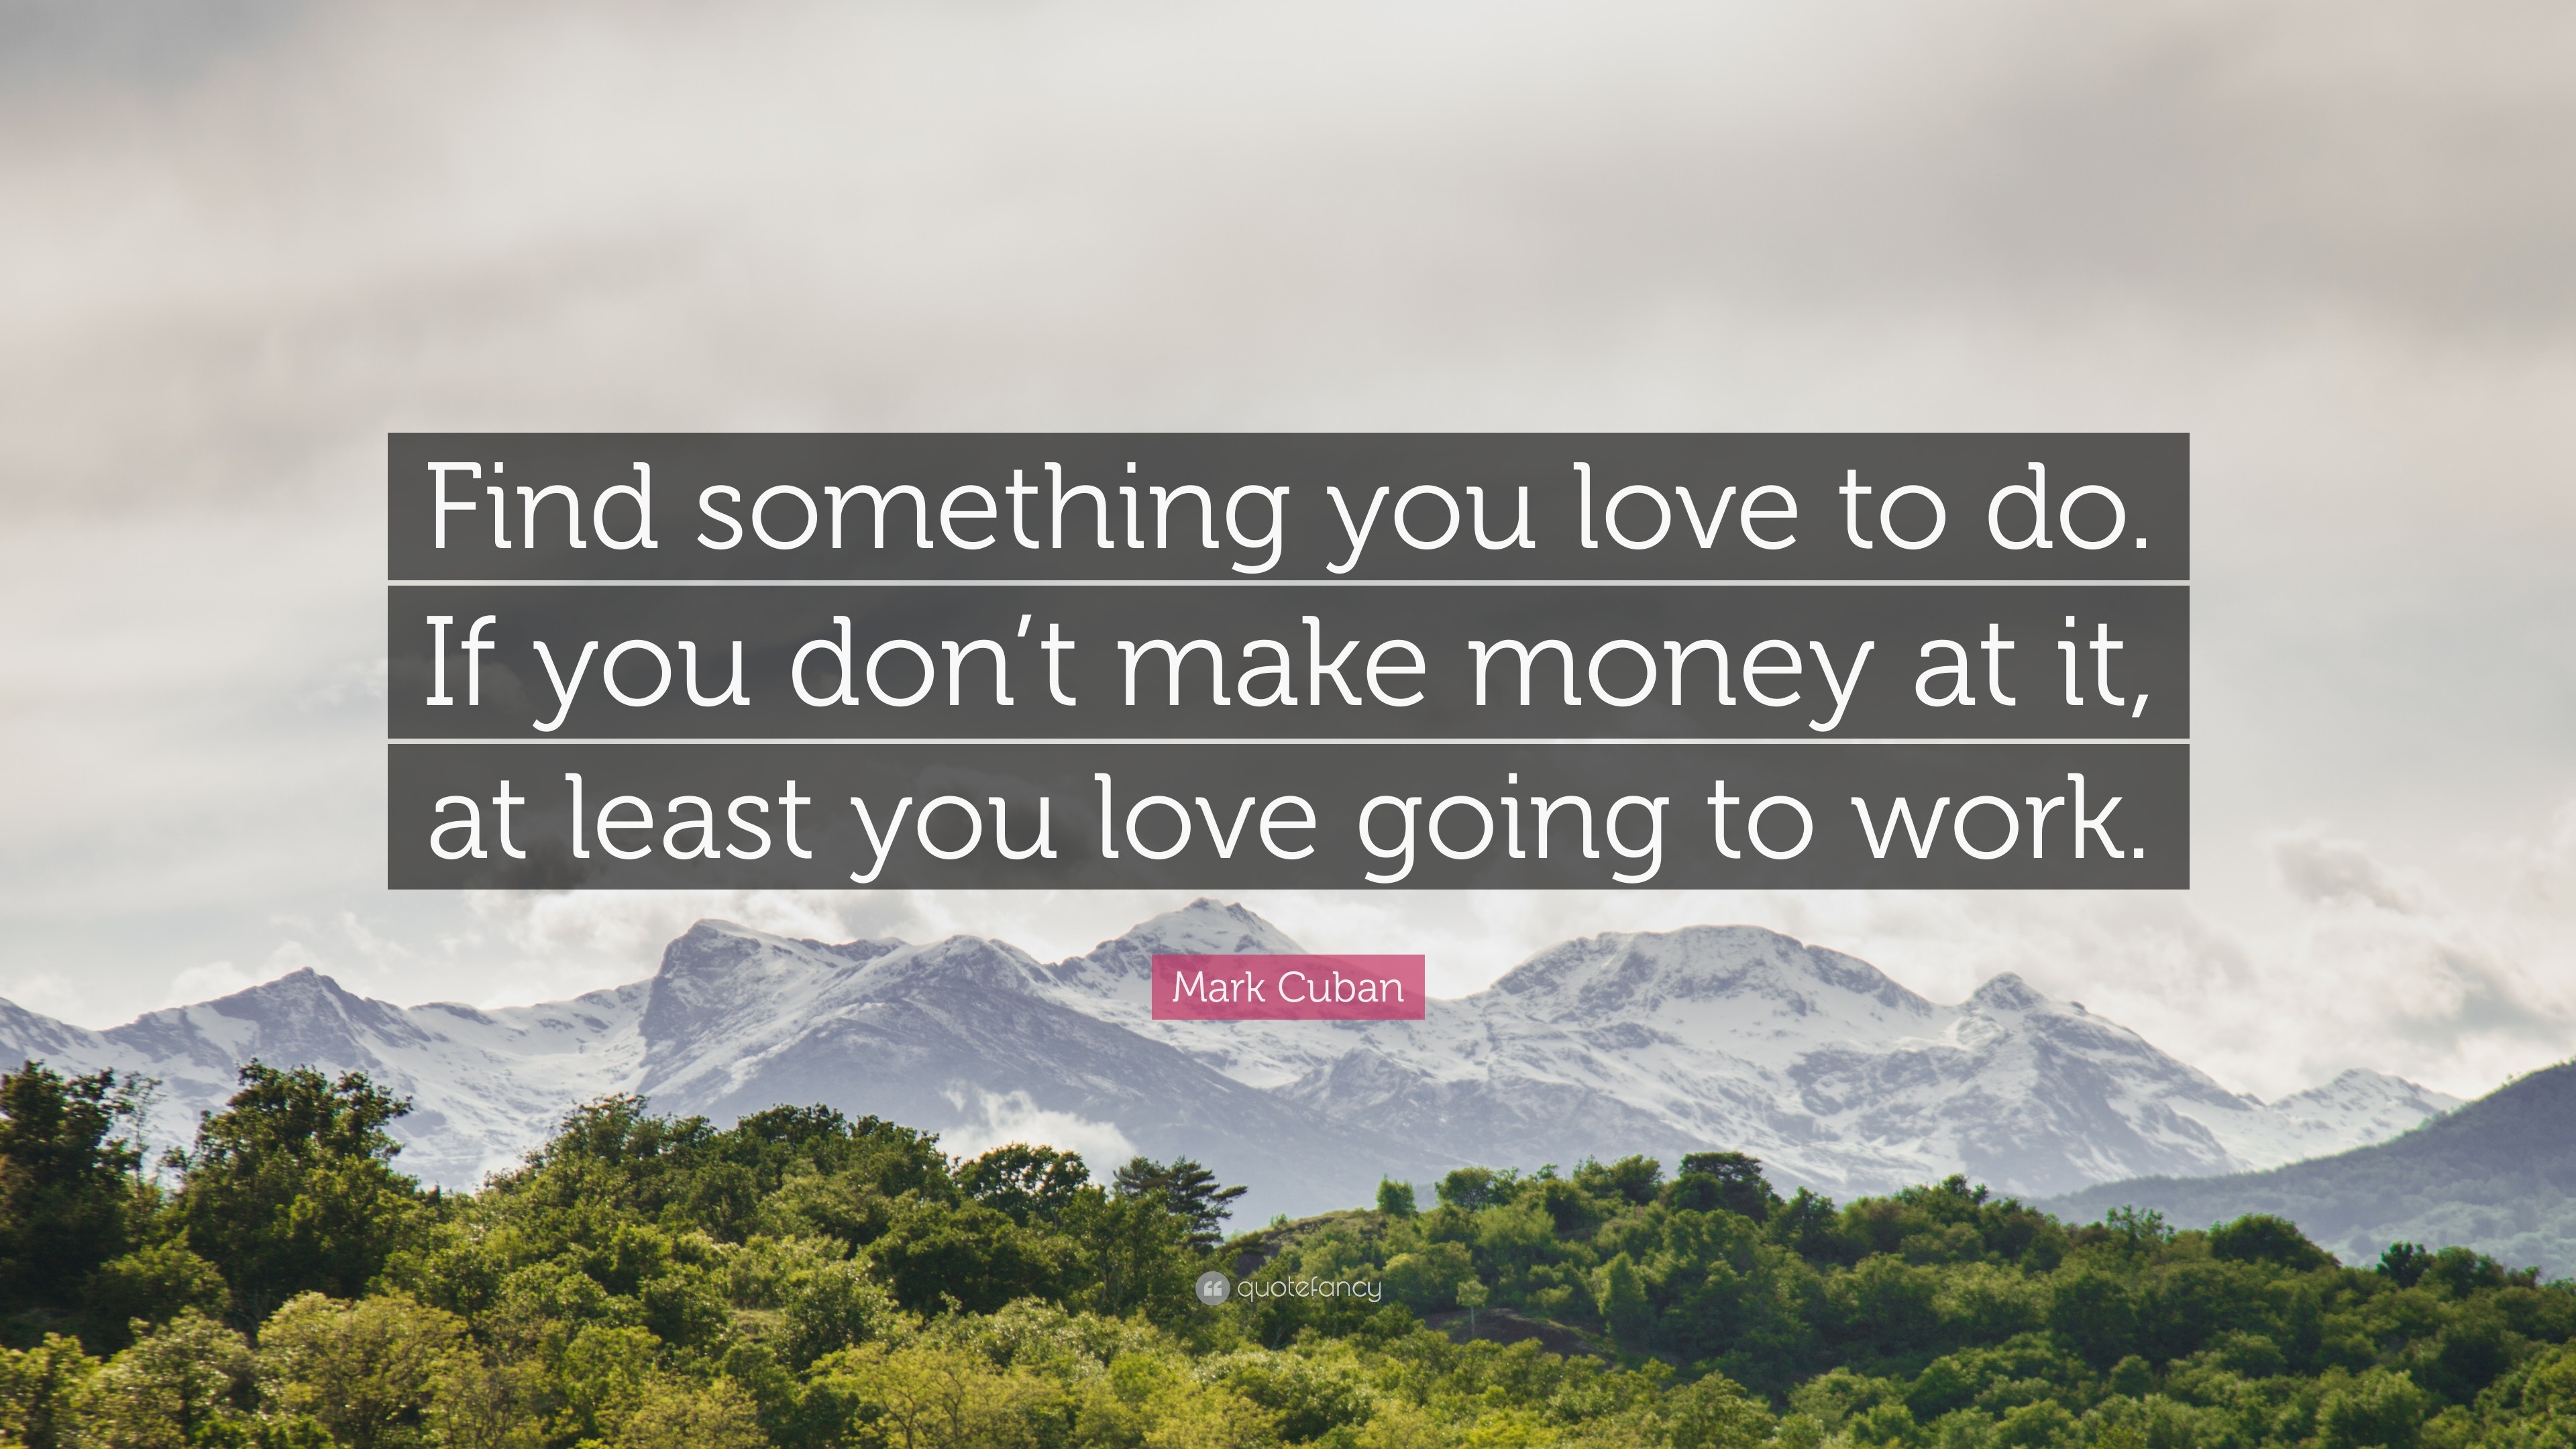 Making Money Quotes “Find something you love to do If you don